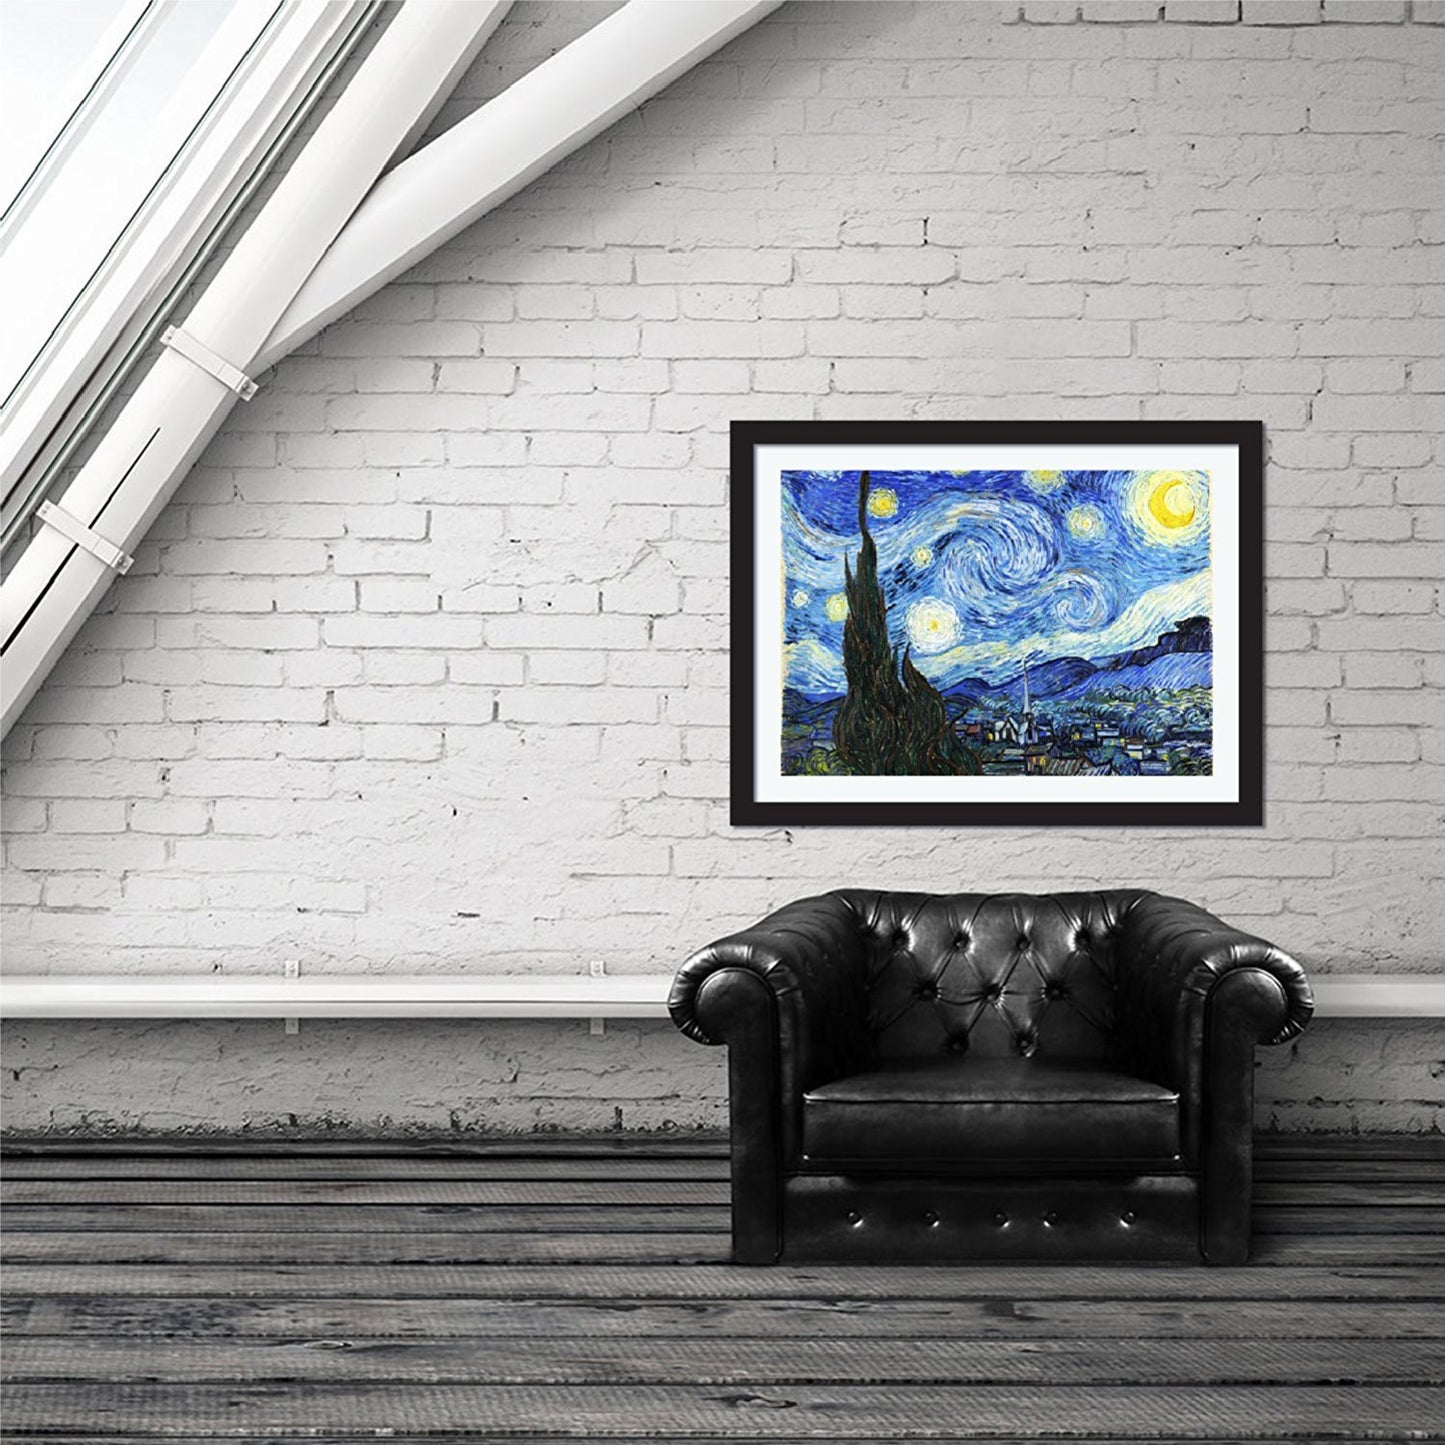 Starry Night by Van Gogh Wall Art Decoration-Oil Paint Reproduction - Young N' Refined